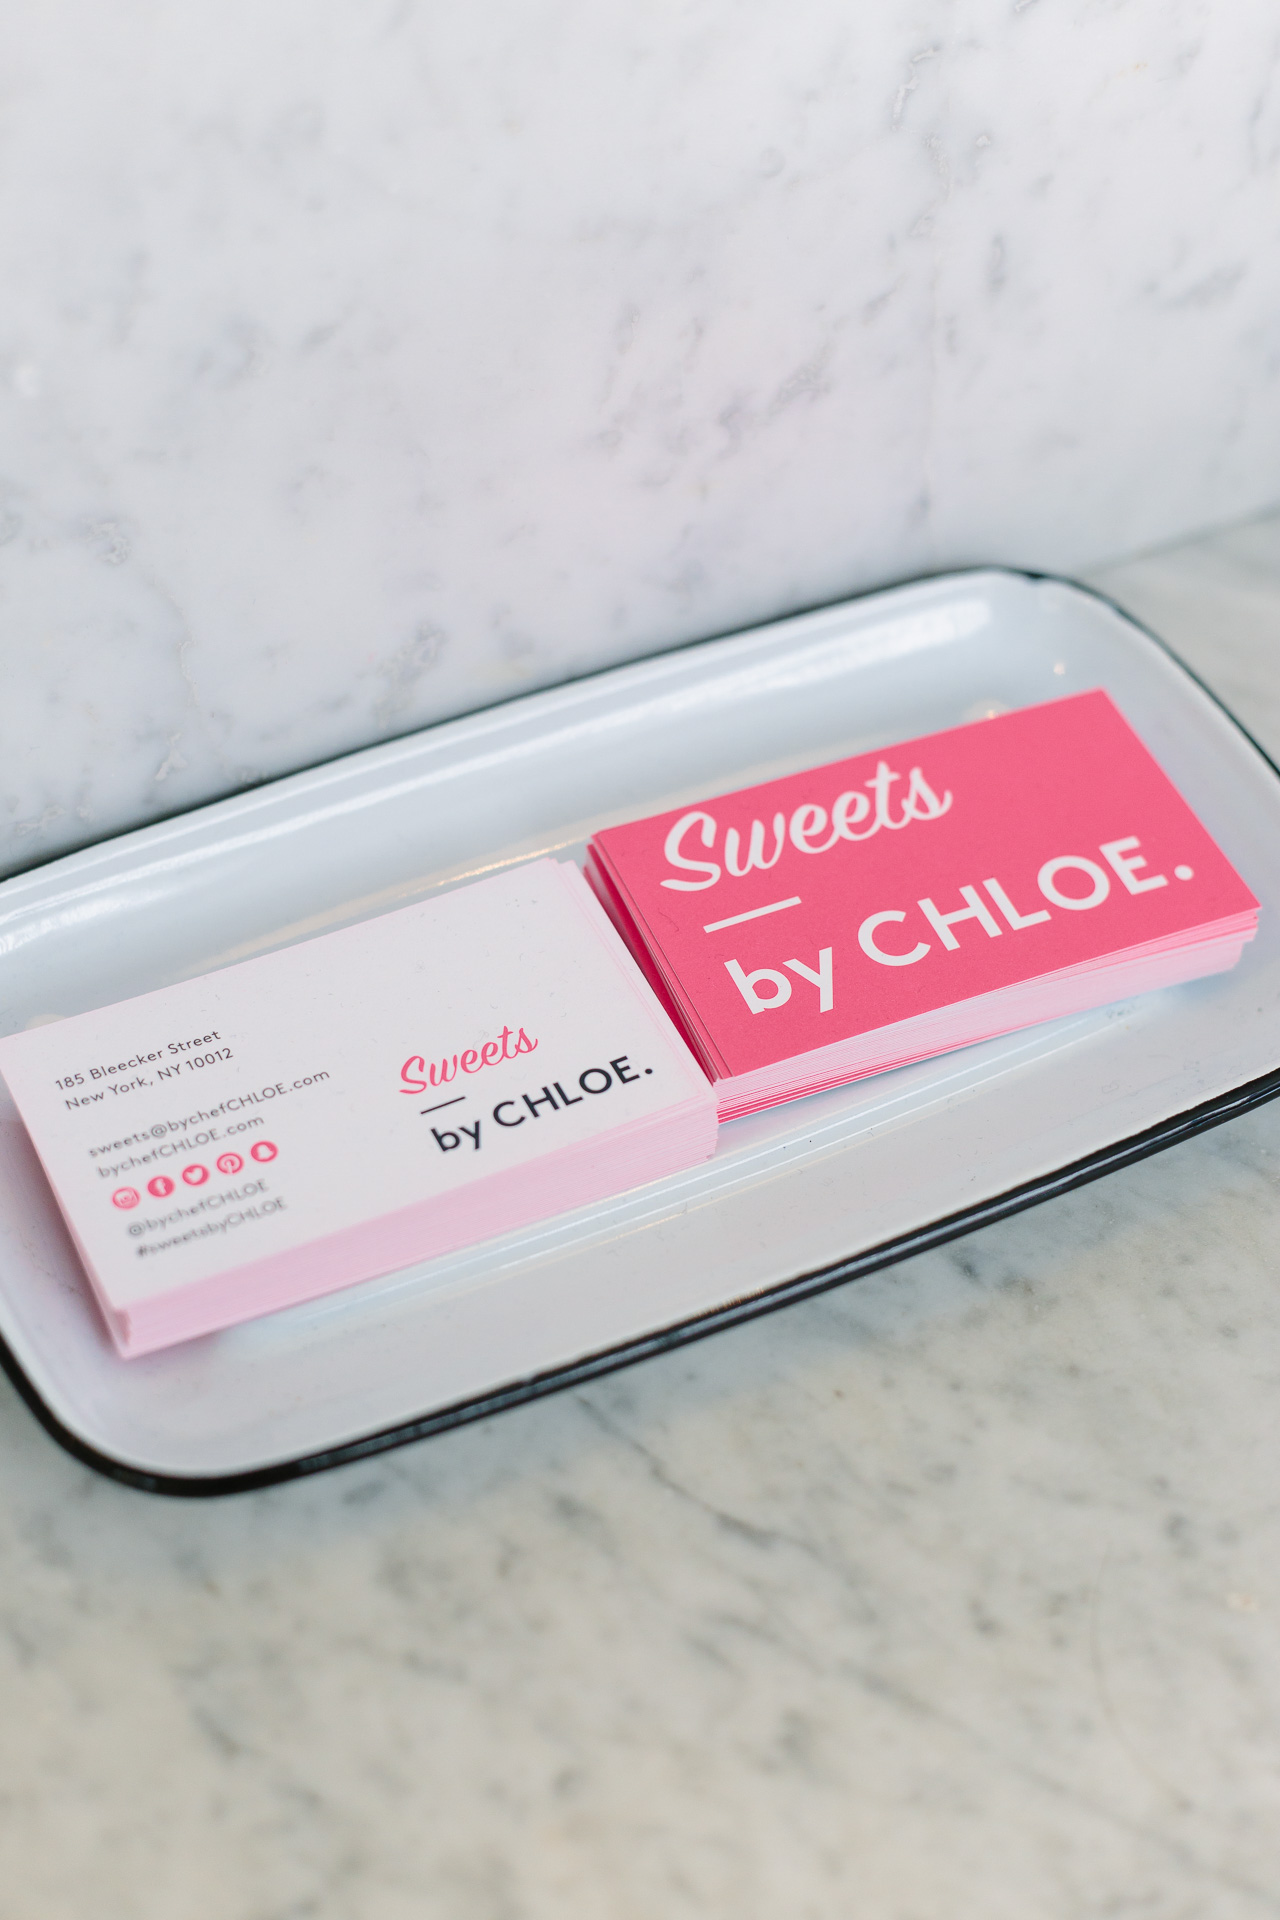 Pink business cards at Sweets by Chloe